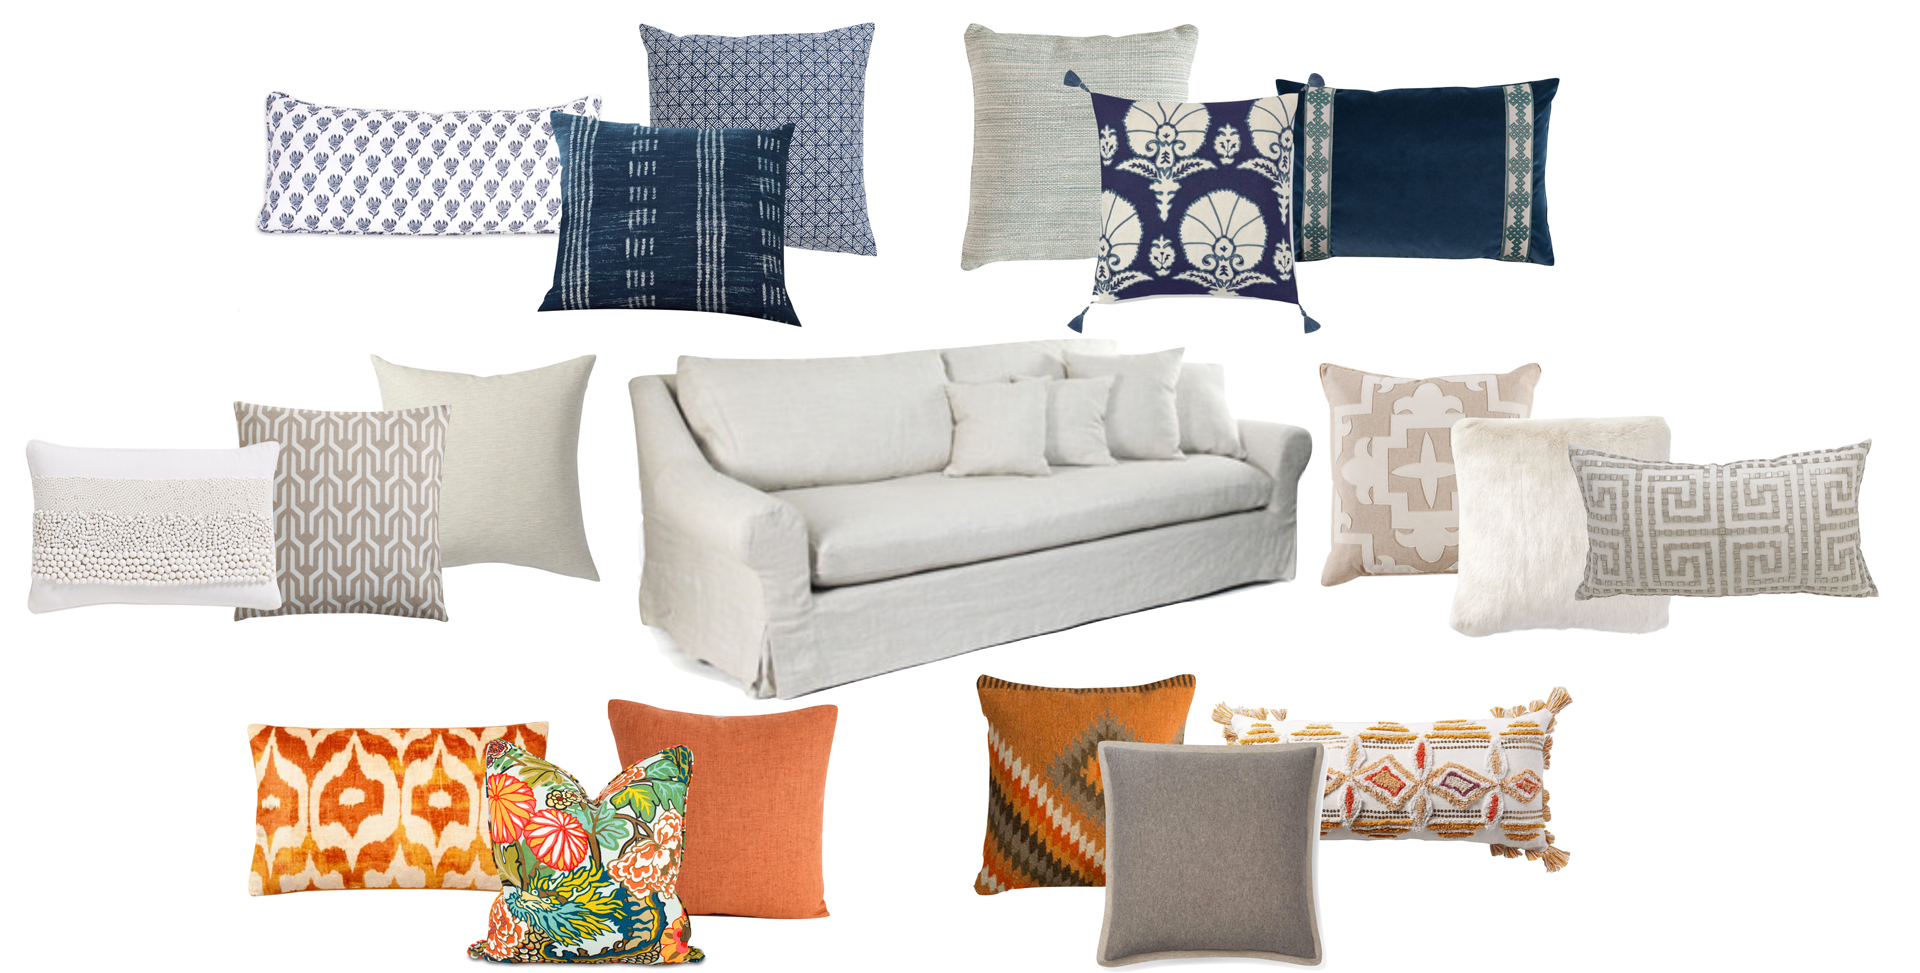 neutral sofa, main image, featured image, pillows, mintwood home